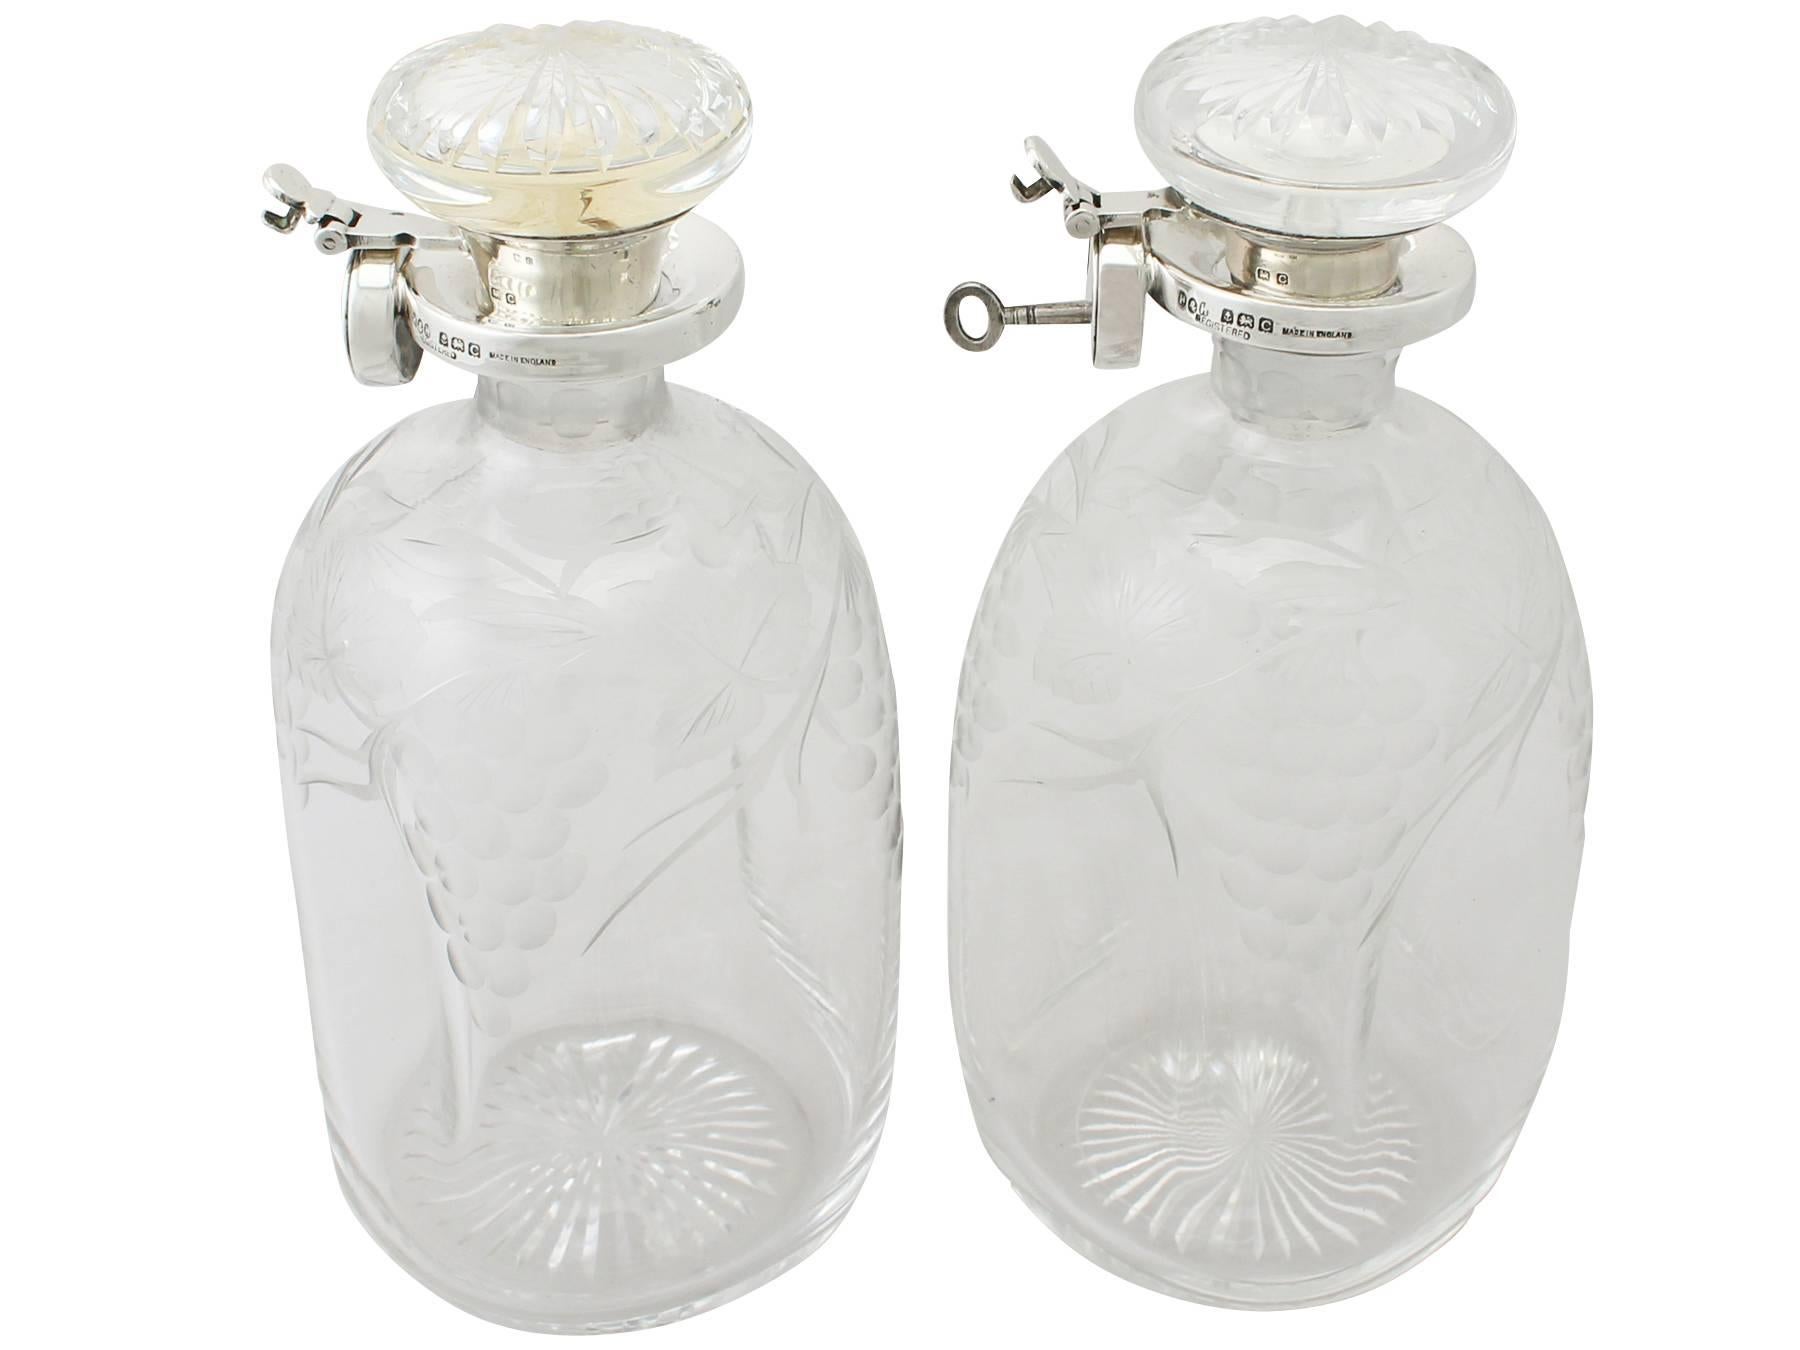 An exceptional, fine and impressive pair of antique George V blown and acid etched glass, English sterling silver mounted locking decanters made by Hukin & Heath Ltd, an addition to our wine related silverware collection.

These exceptional